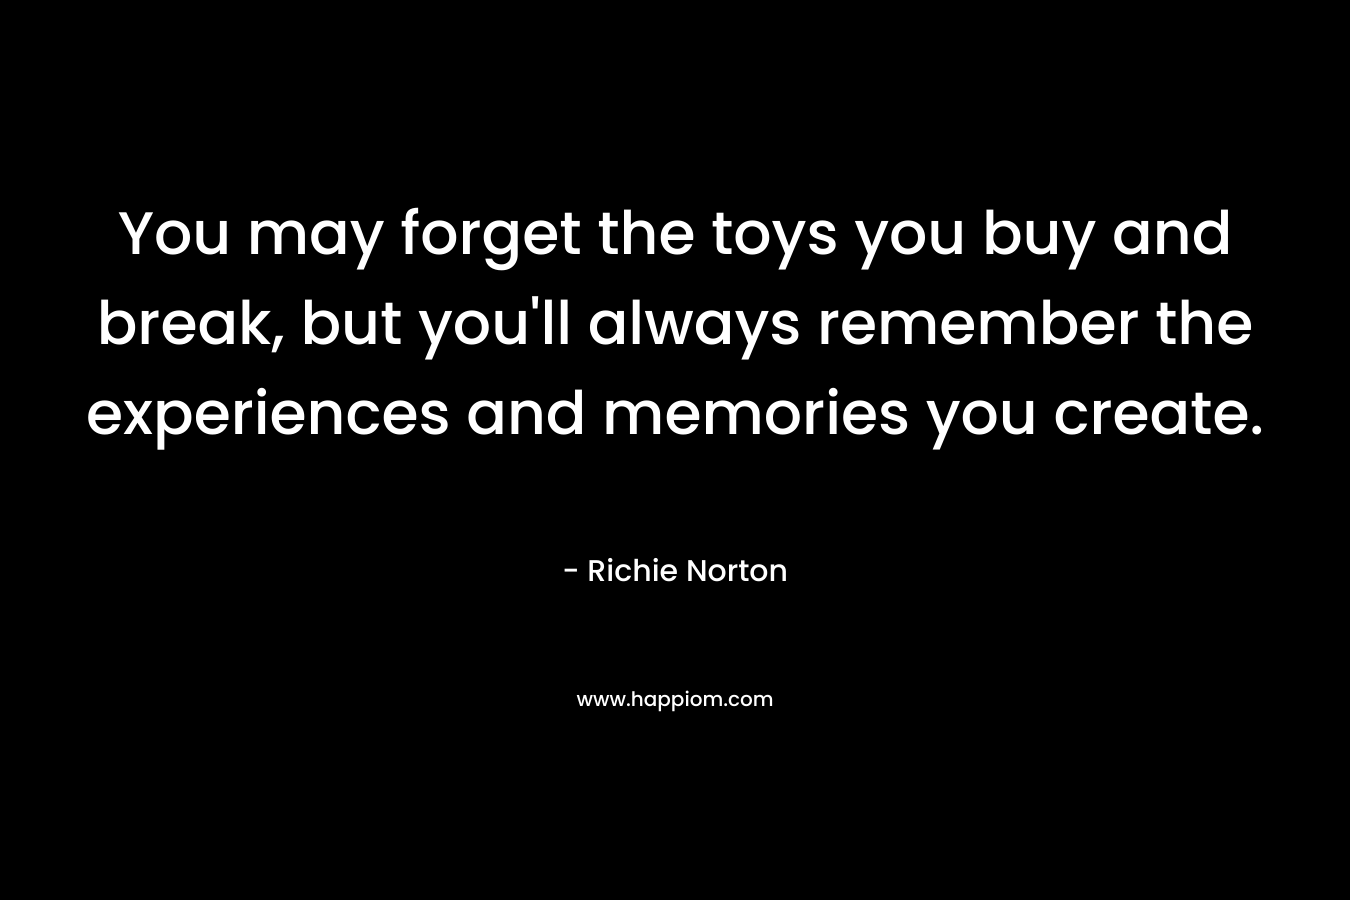 You may forget the toys you buy and break, but you’ll always remember the experiences and memories you create. – Richie Norton